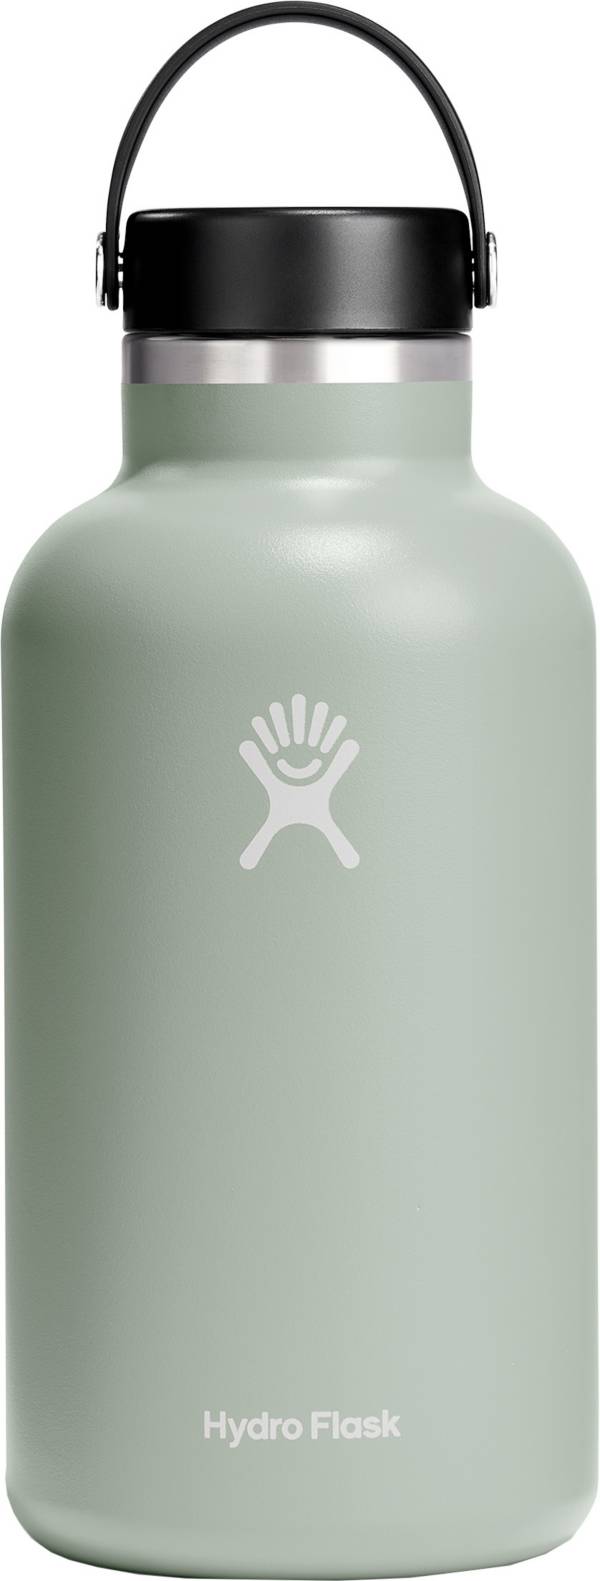 Hydro Flask 64 oz. Wide Mouth Bottle product image